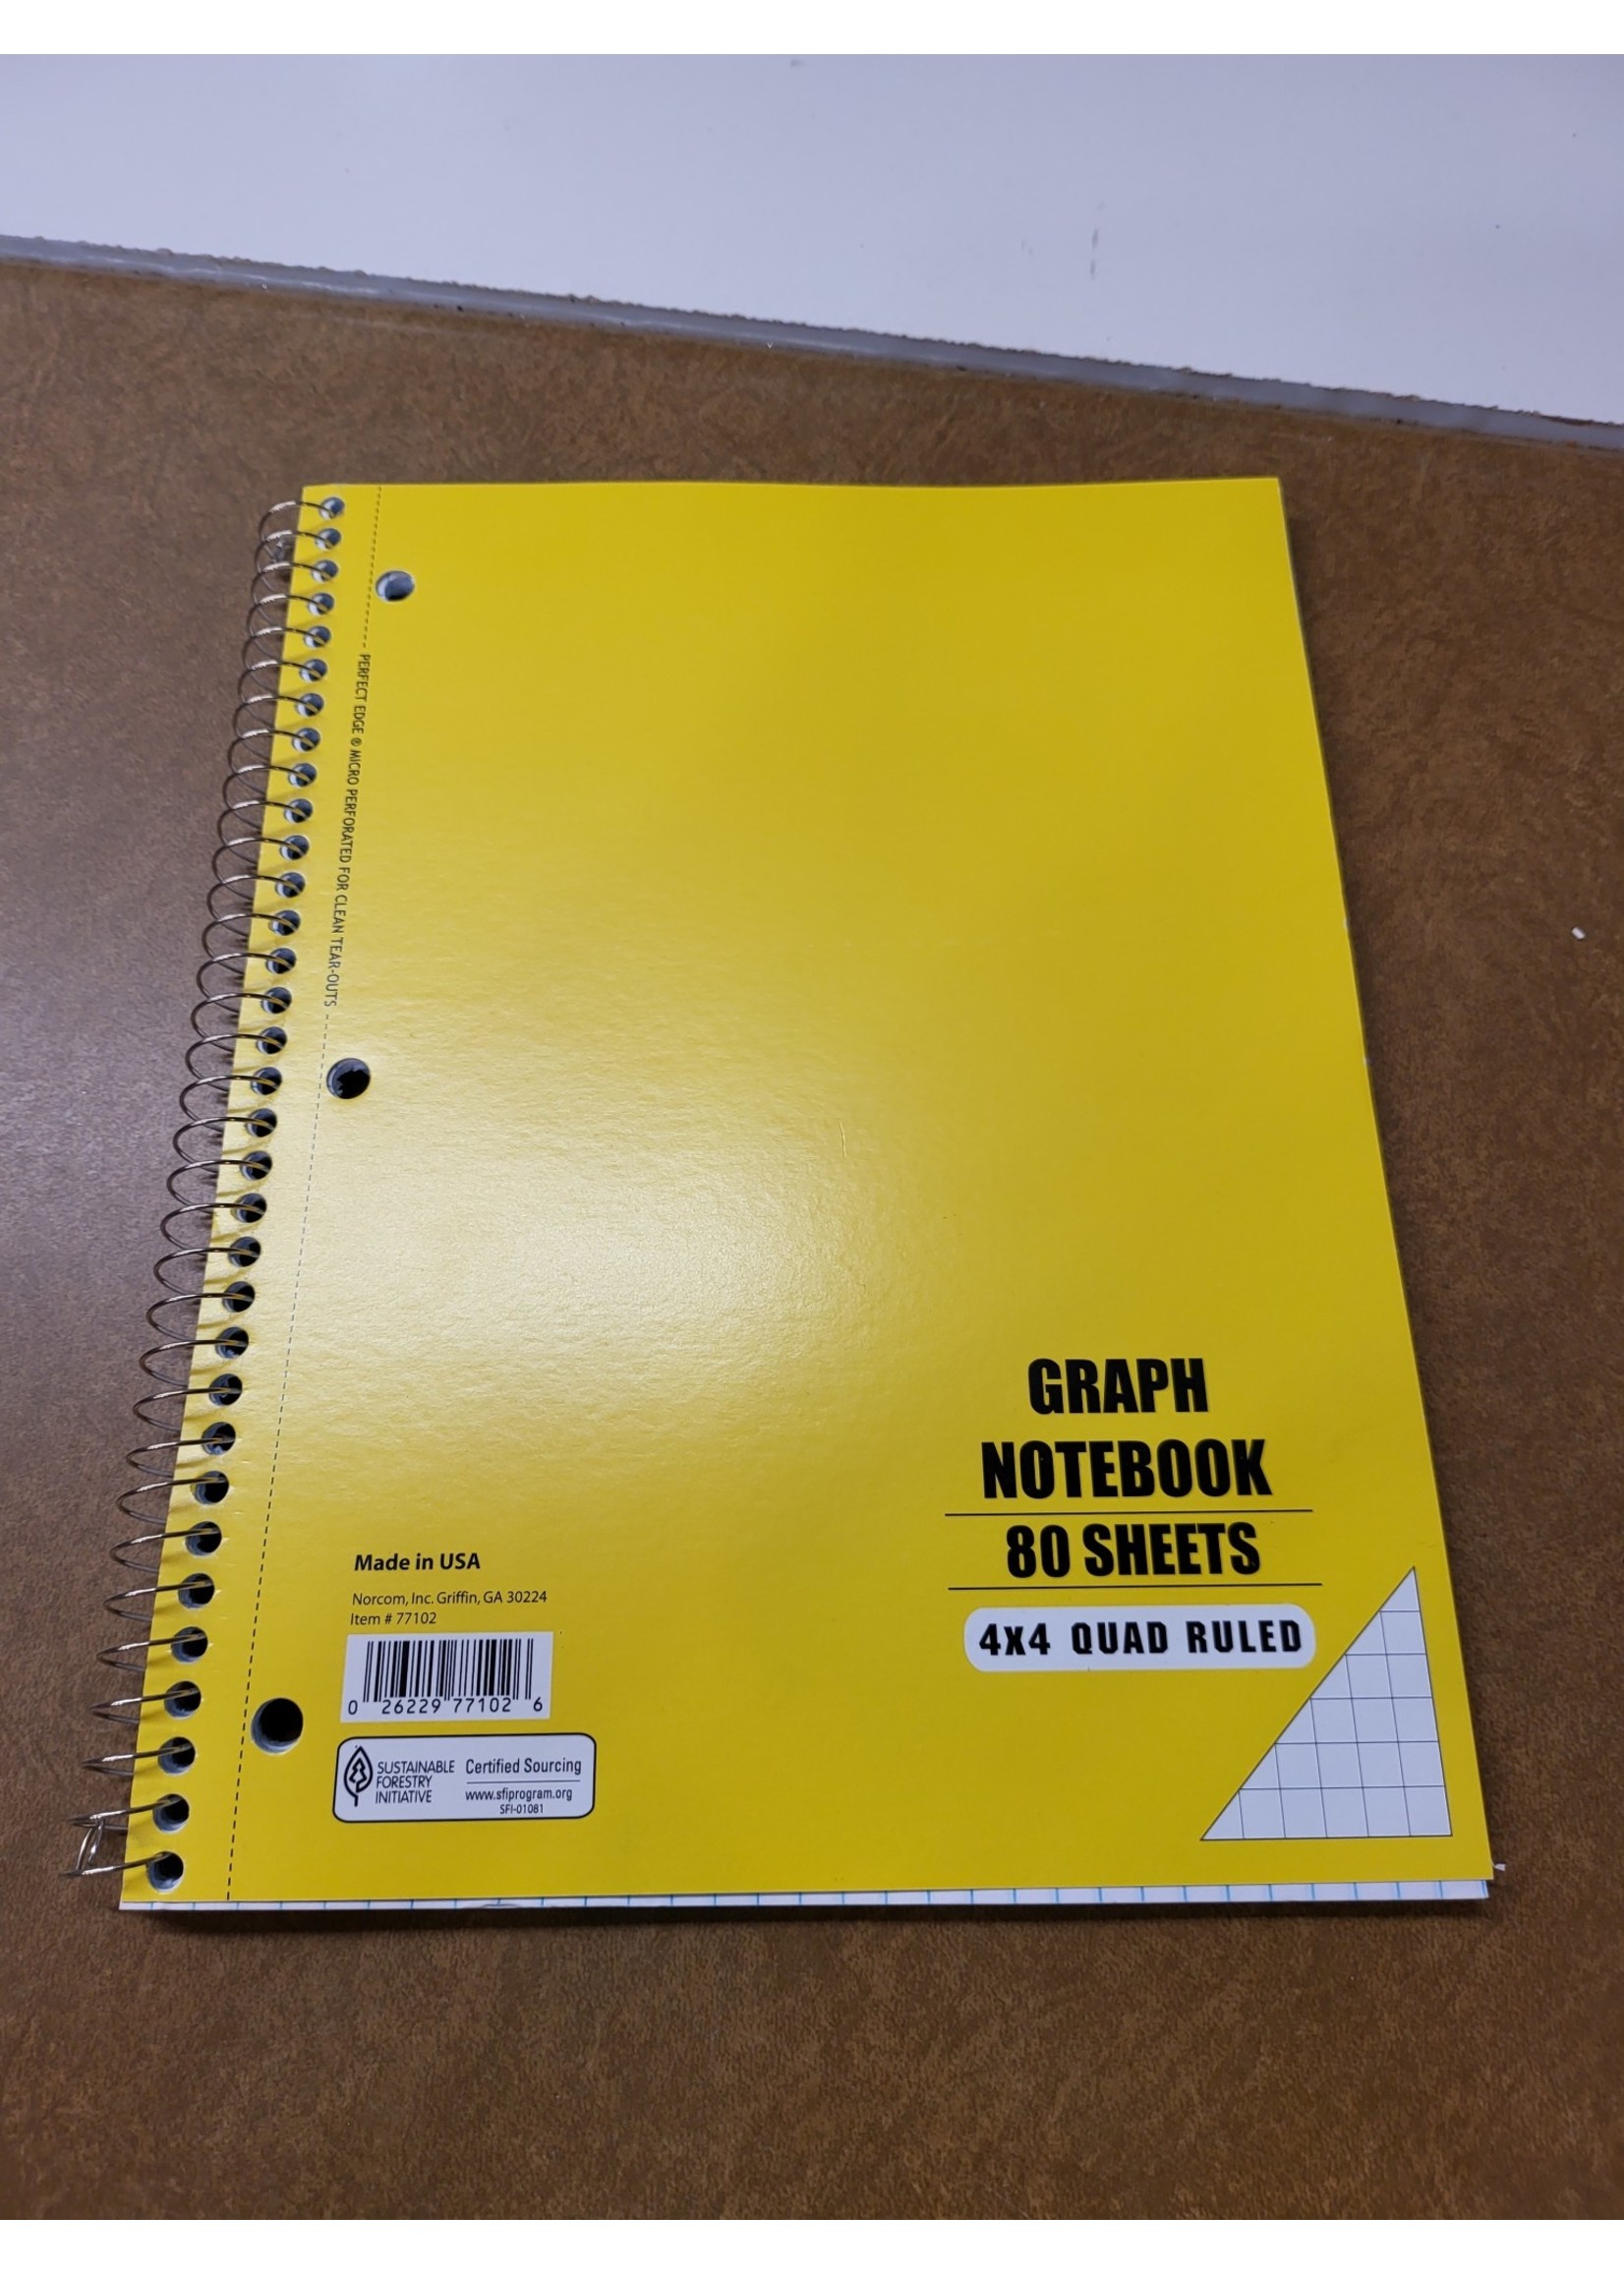 Graph Notebook 80 Sheets 4x4 Quad Ruled Yellow